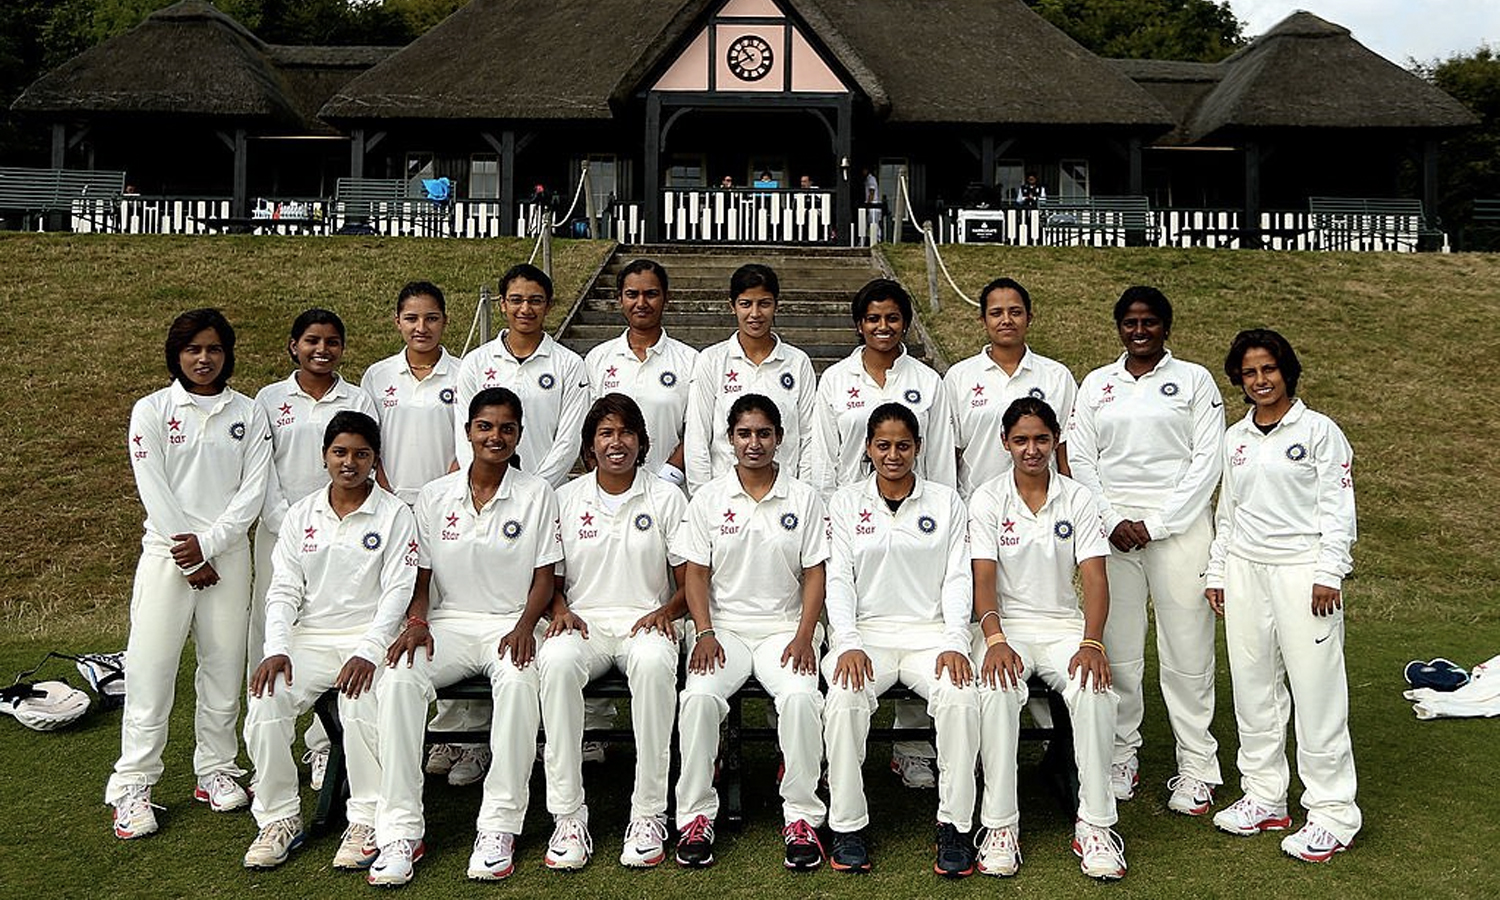 Indian women's cricket team to play first test match since 2014